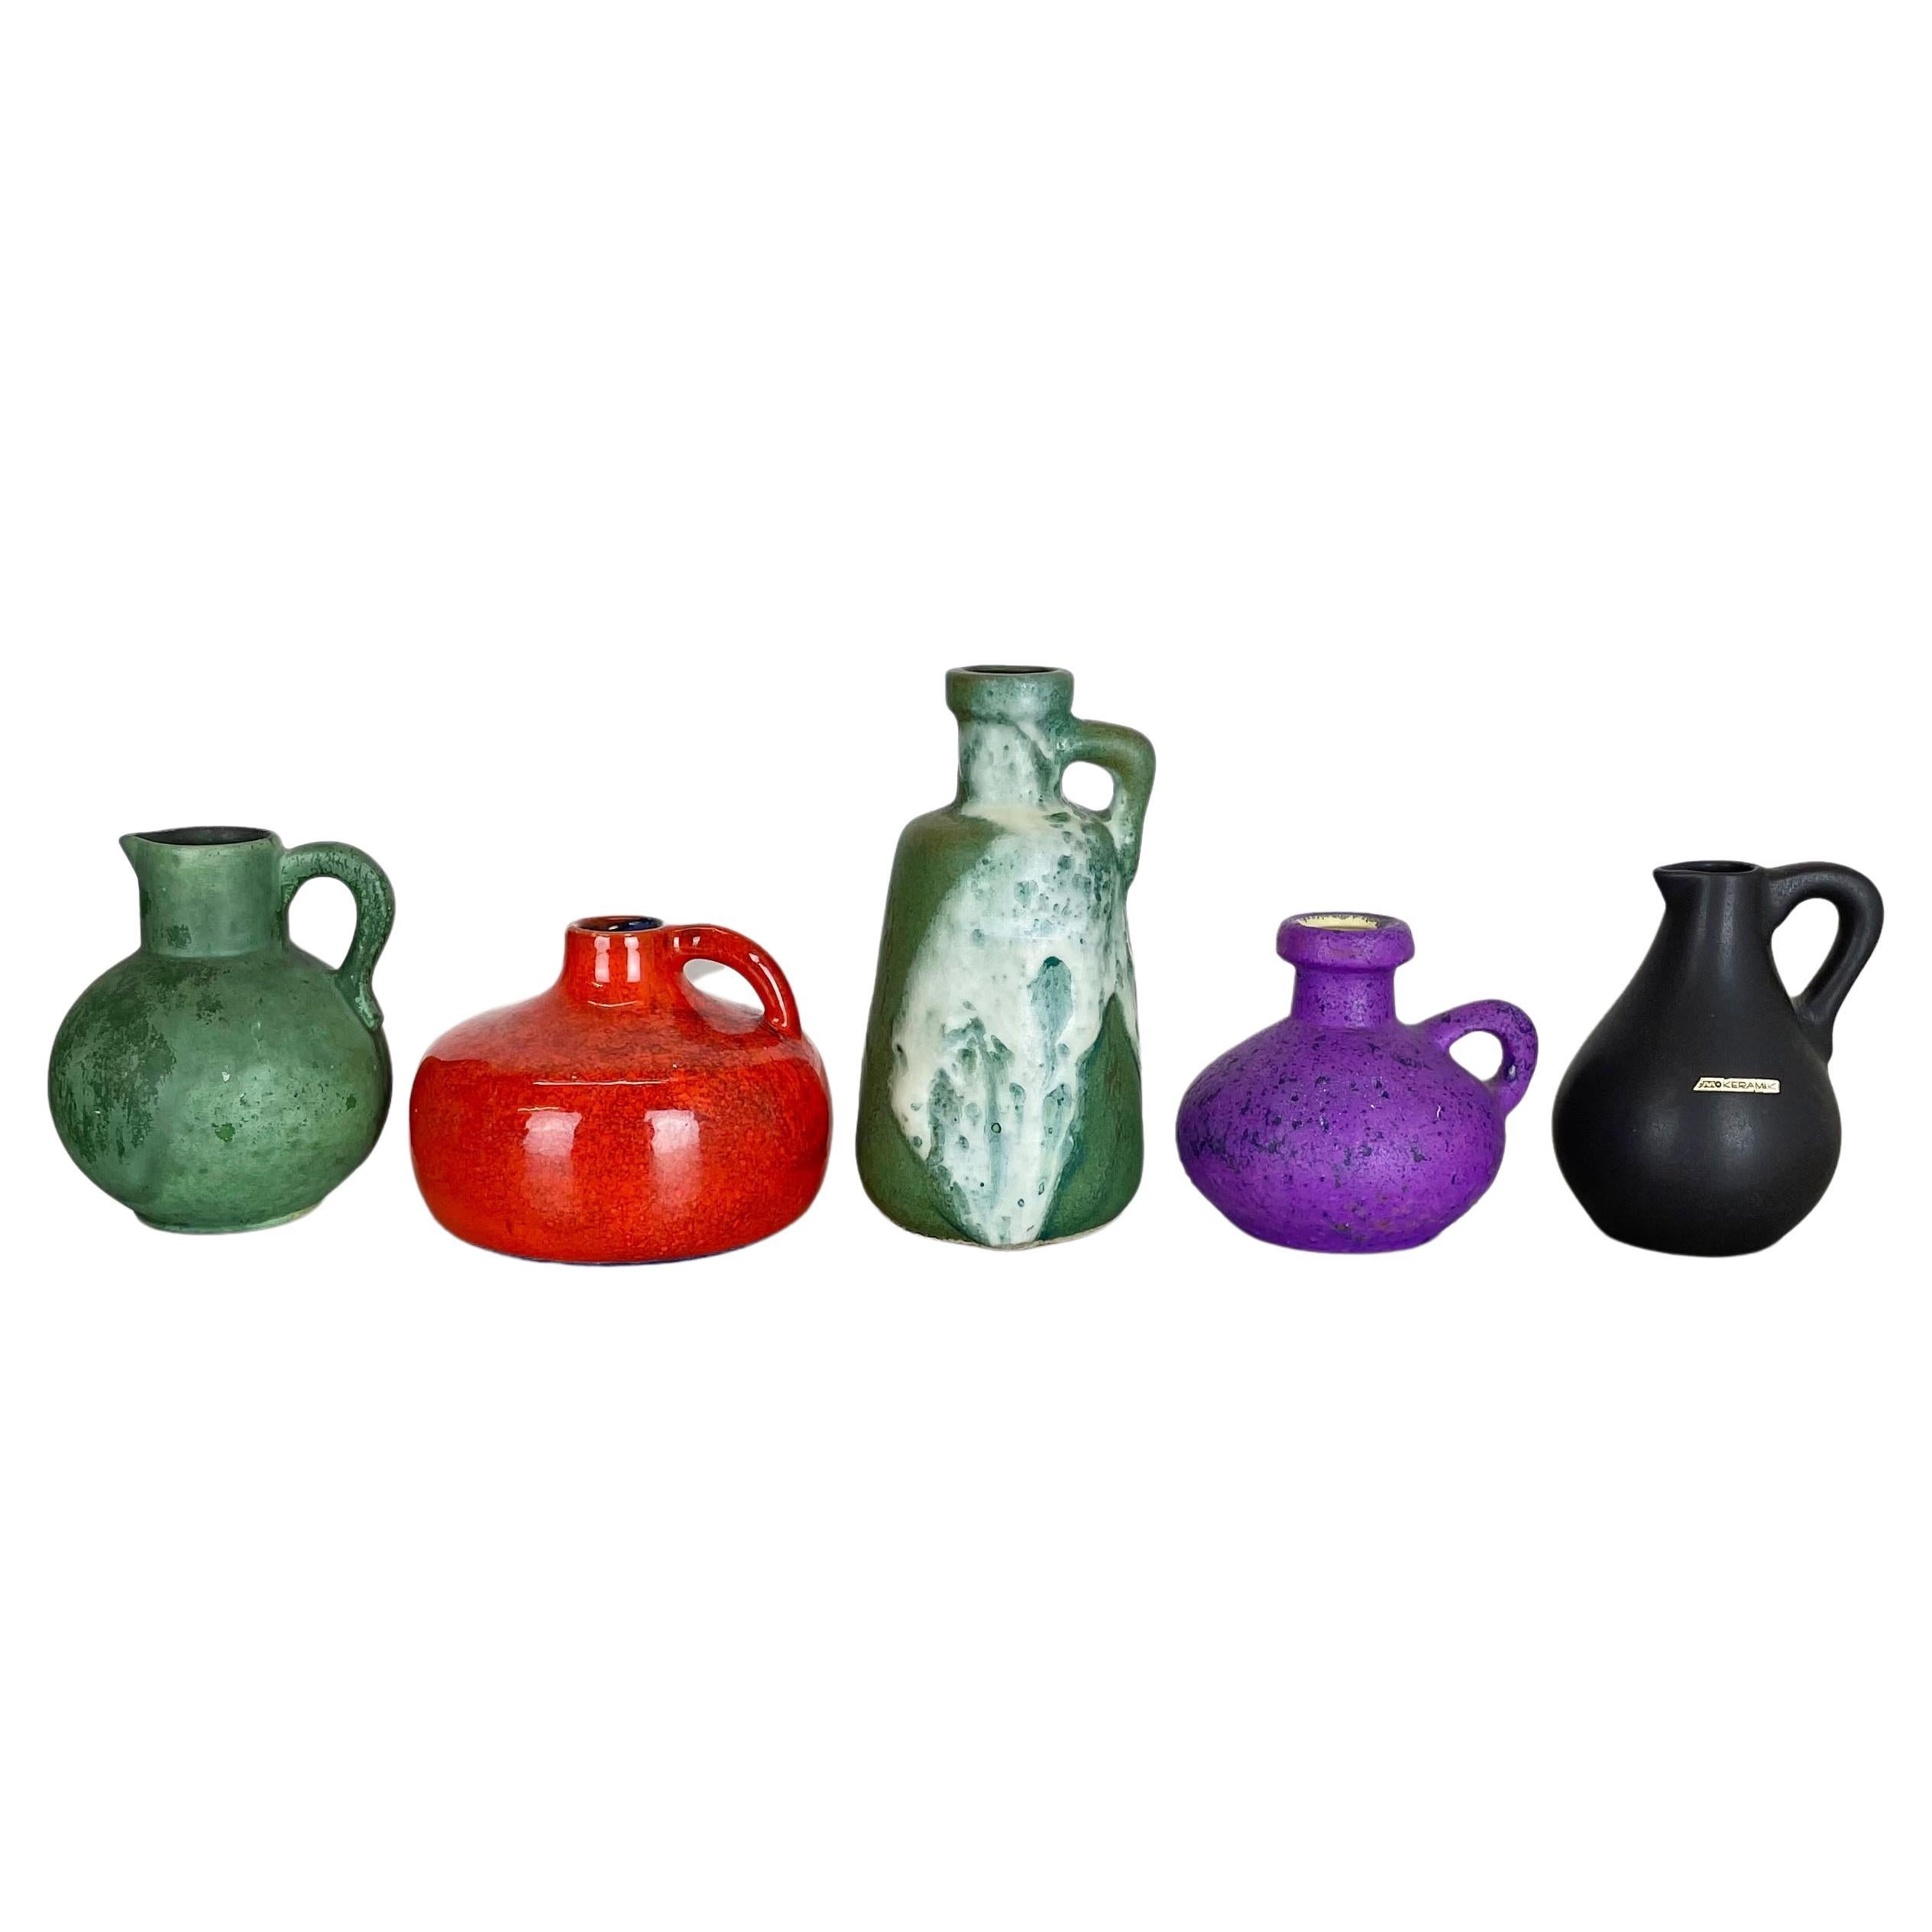 Set of 5 Multicolor Ceramic Pottery Vase Objects by Otto Keramik, Germany, 1970s For Sale